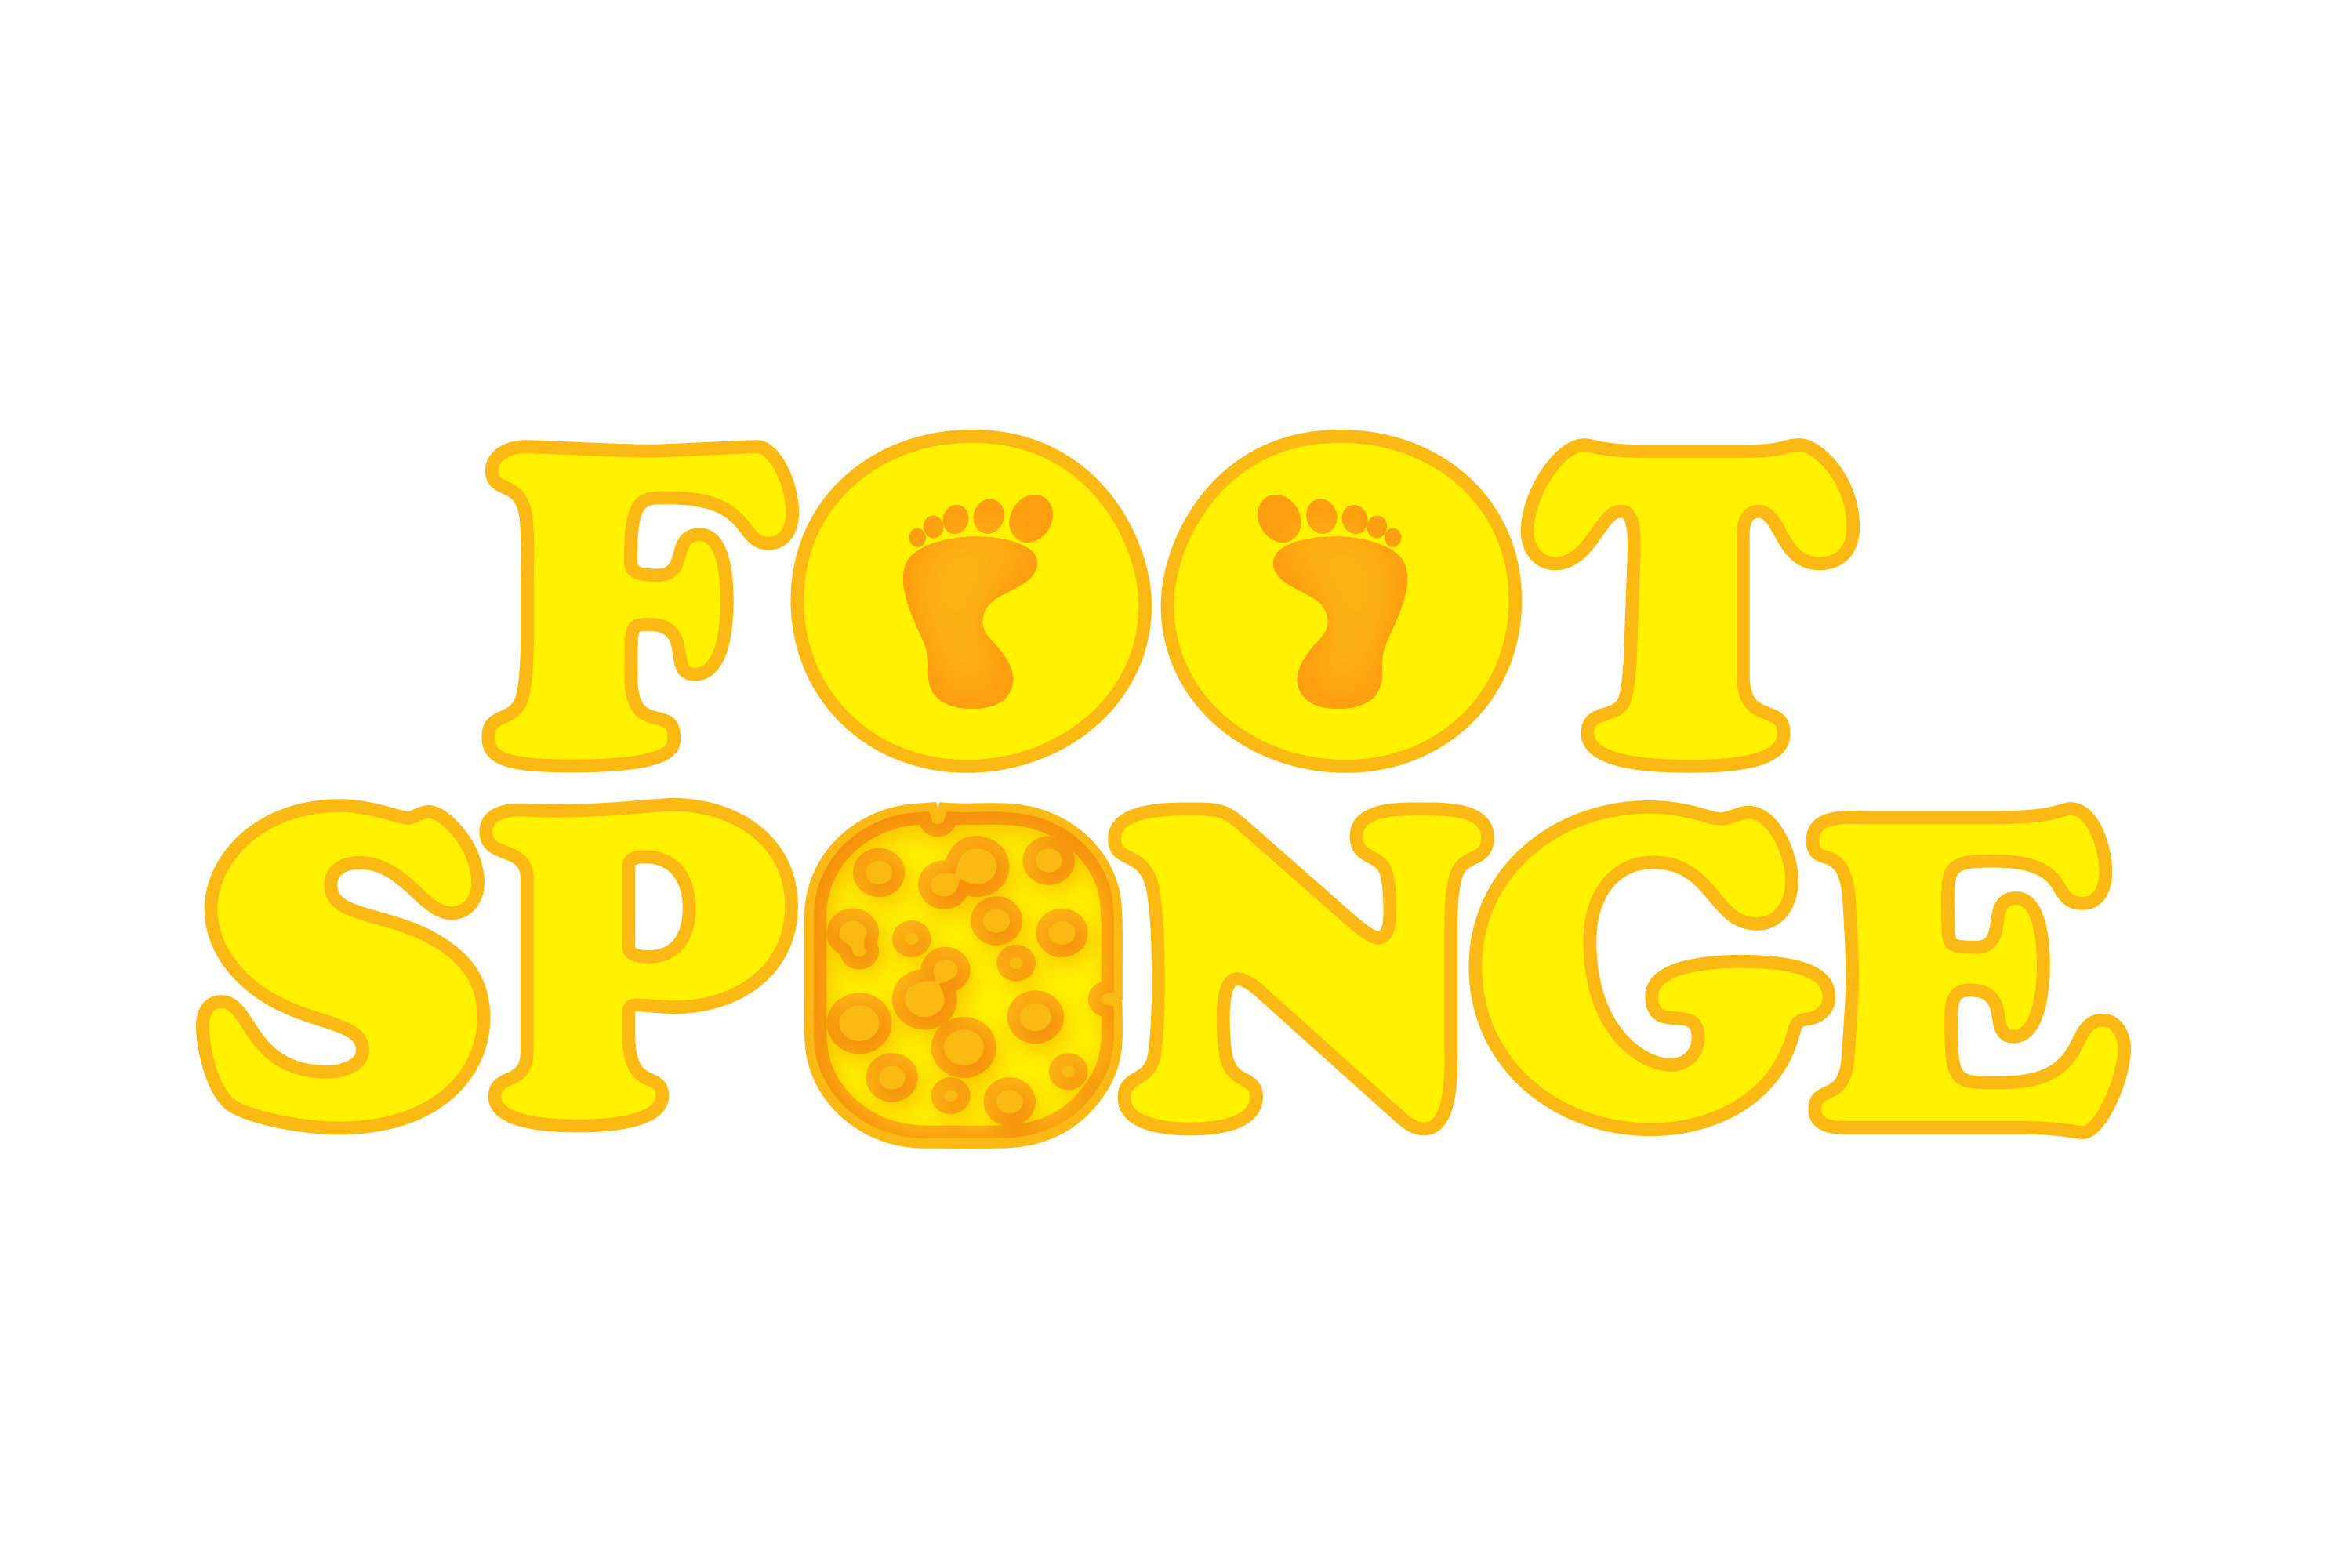 Foot Sponge is a hygiene invention designed to provide a hands-free and easy way to clean the feet.